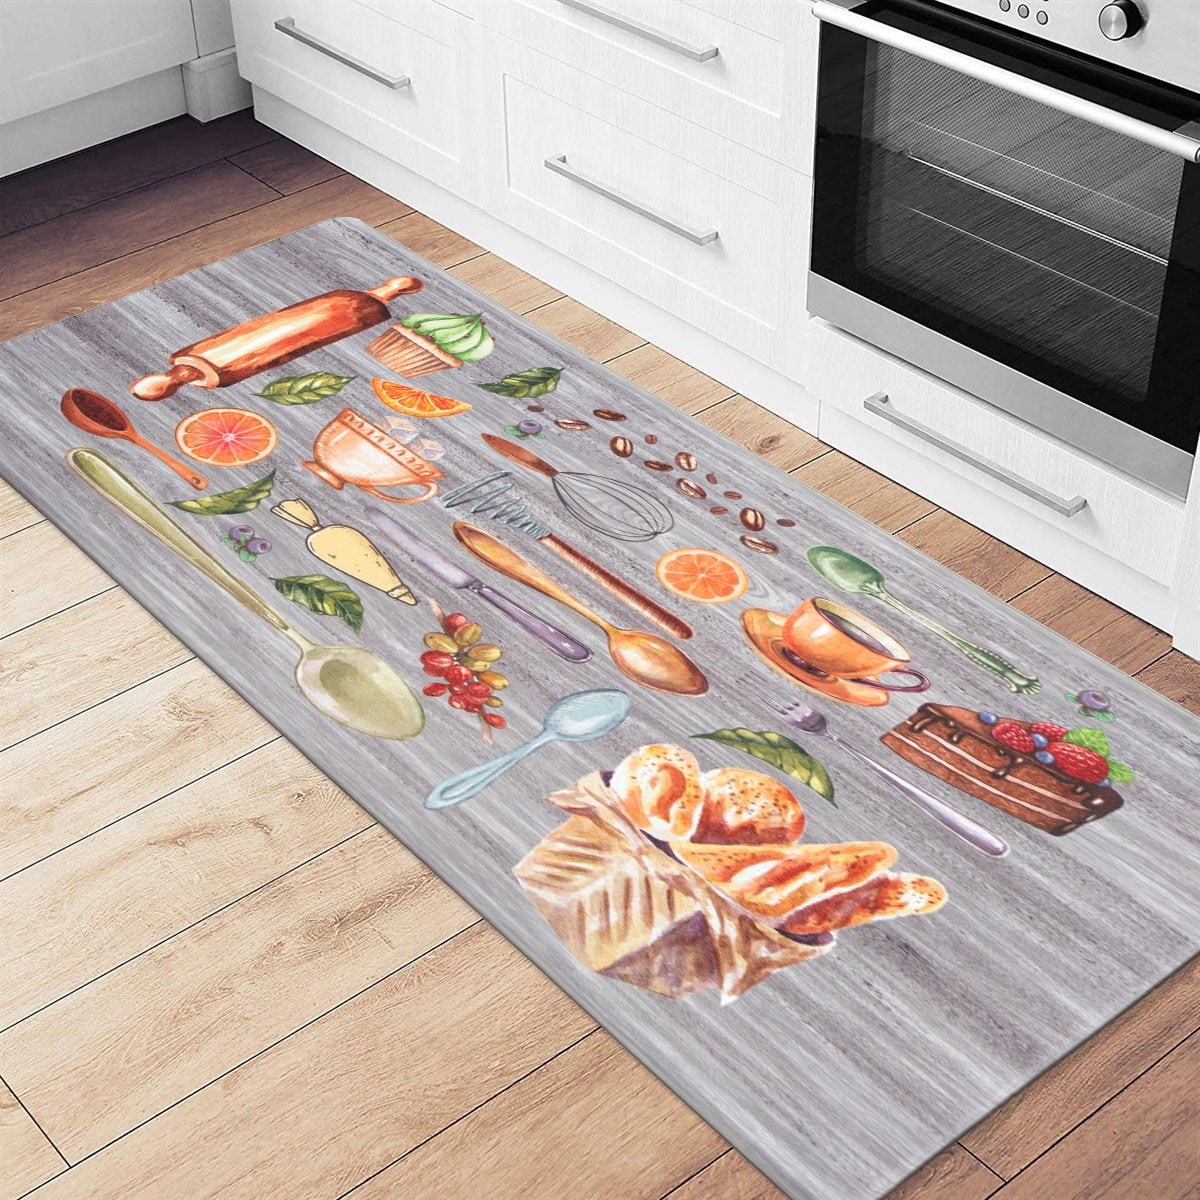 https://ak1.ostkcdn.com/images/products/is/images/direct/17e99c139d29ad876b91ce4d7ddde8a267d504d1/Kitchen-Anti-Fatigue-Standing-Mat.jpg